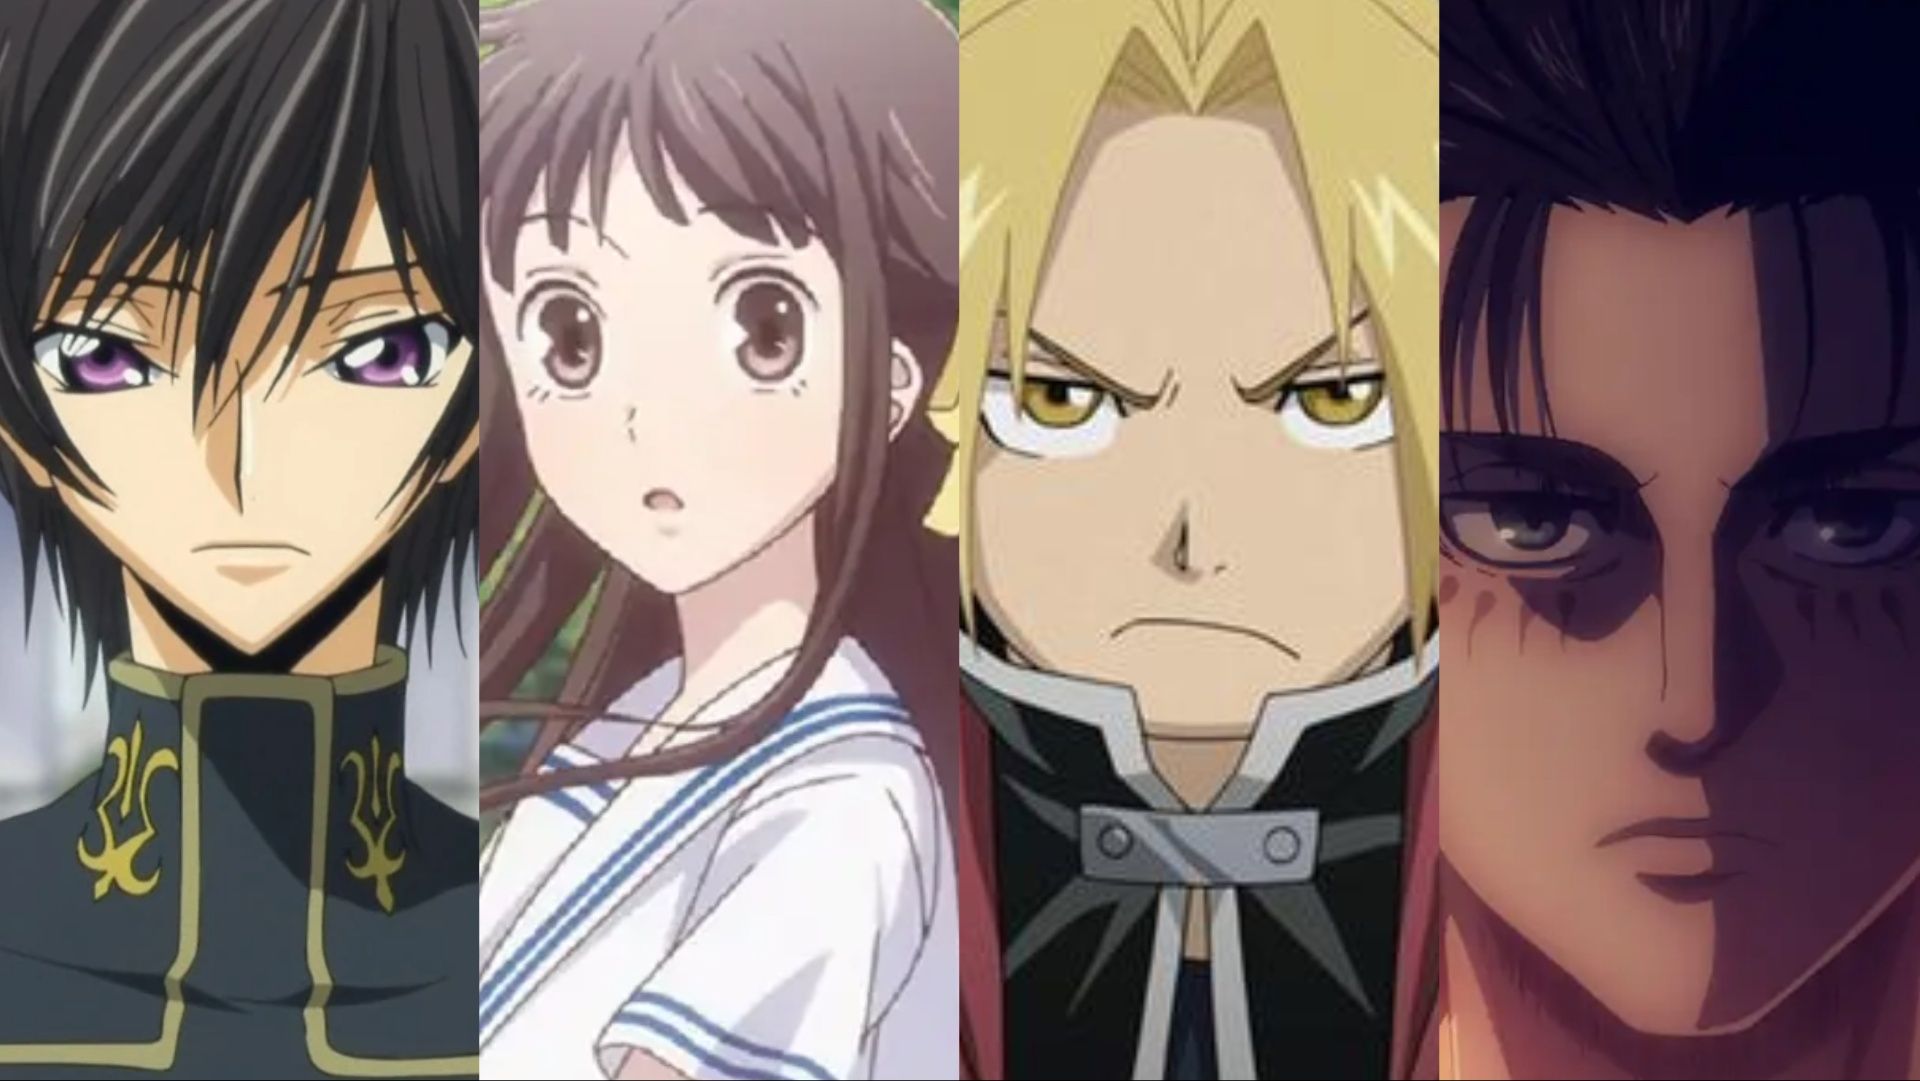 (From Left to Right) A collage of images featuring Lelouche from Code Geass, Tohru from Fruits Basket, Edward from Fullmetal Alchemist Brotherhood, and Eren from Attack on Titan.